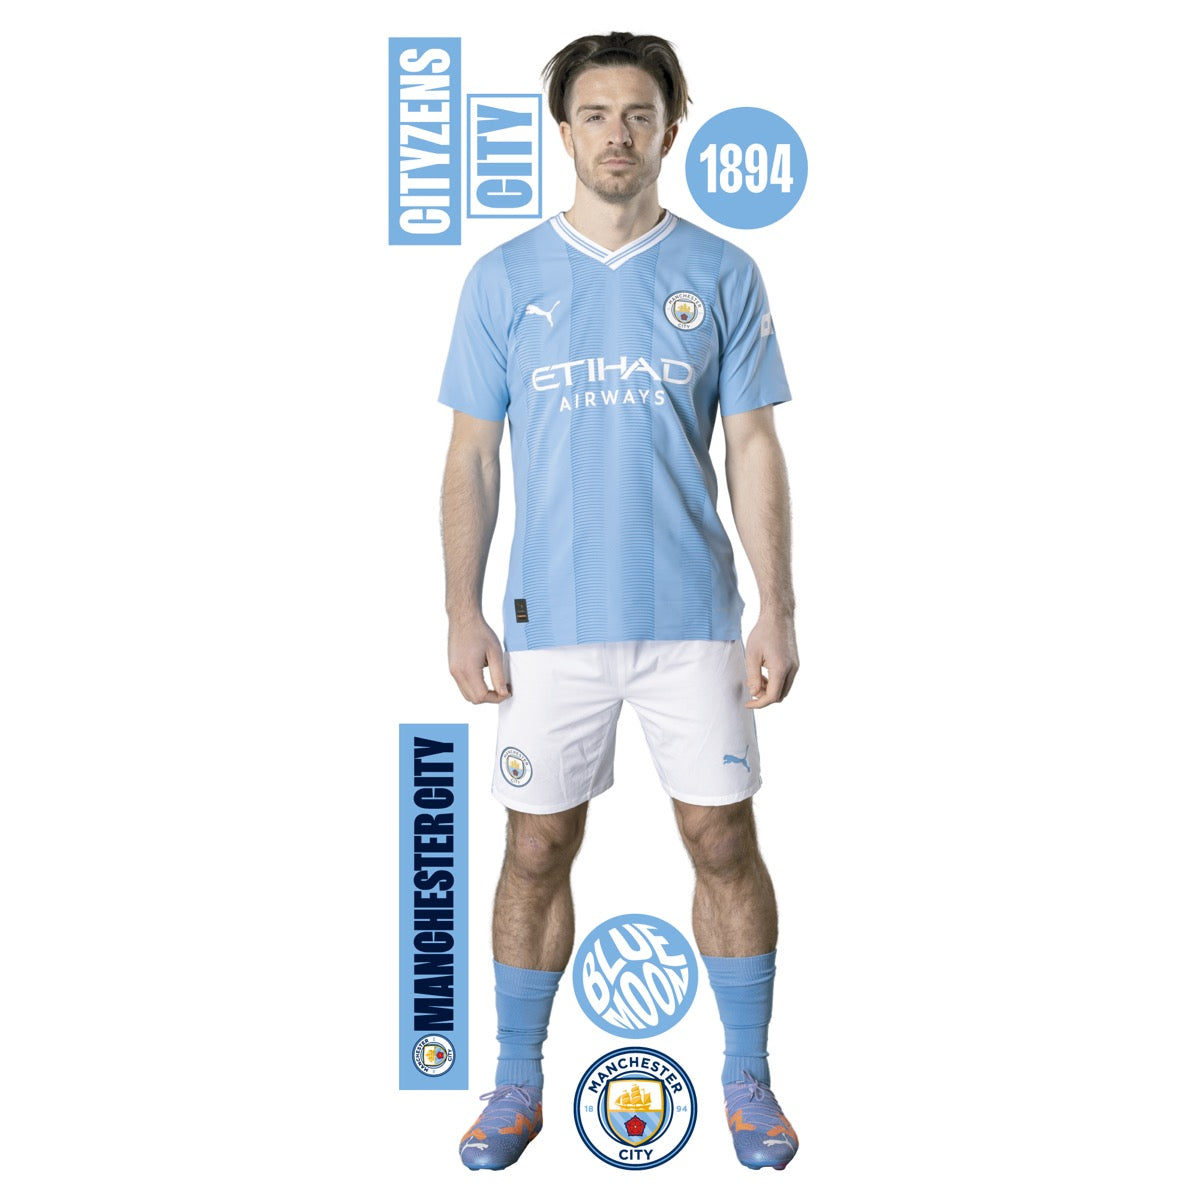 Manchester City FC - Jack Grealish 23/24 Player Wall Sticker + Decal Set